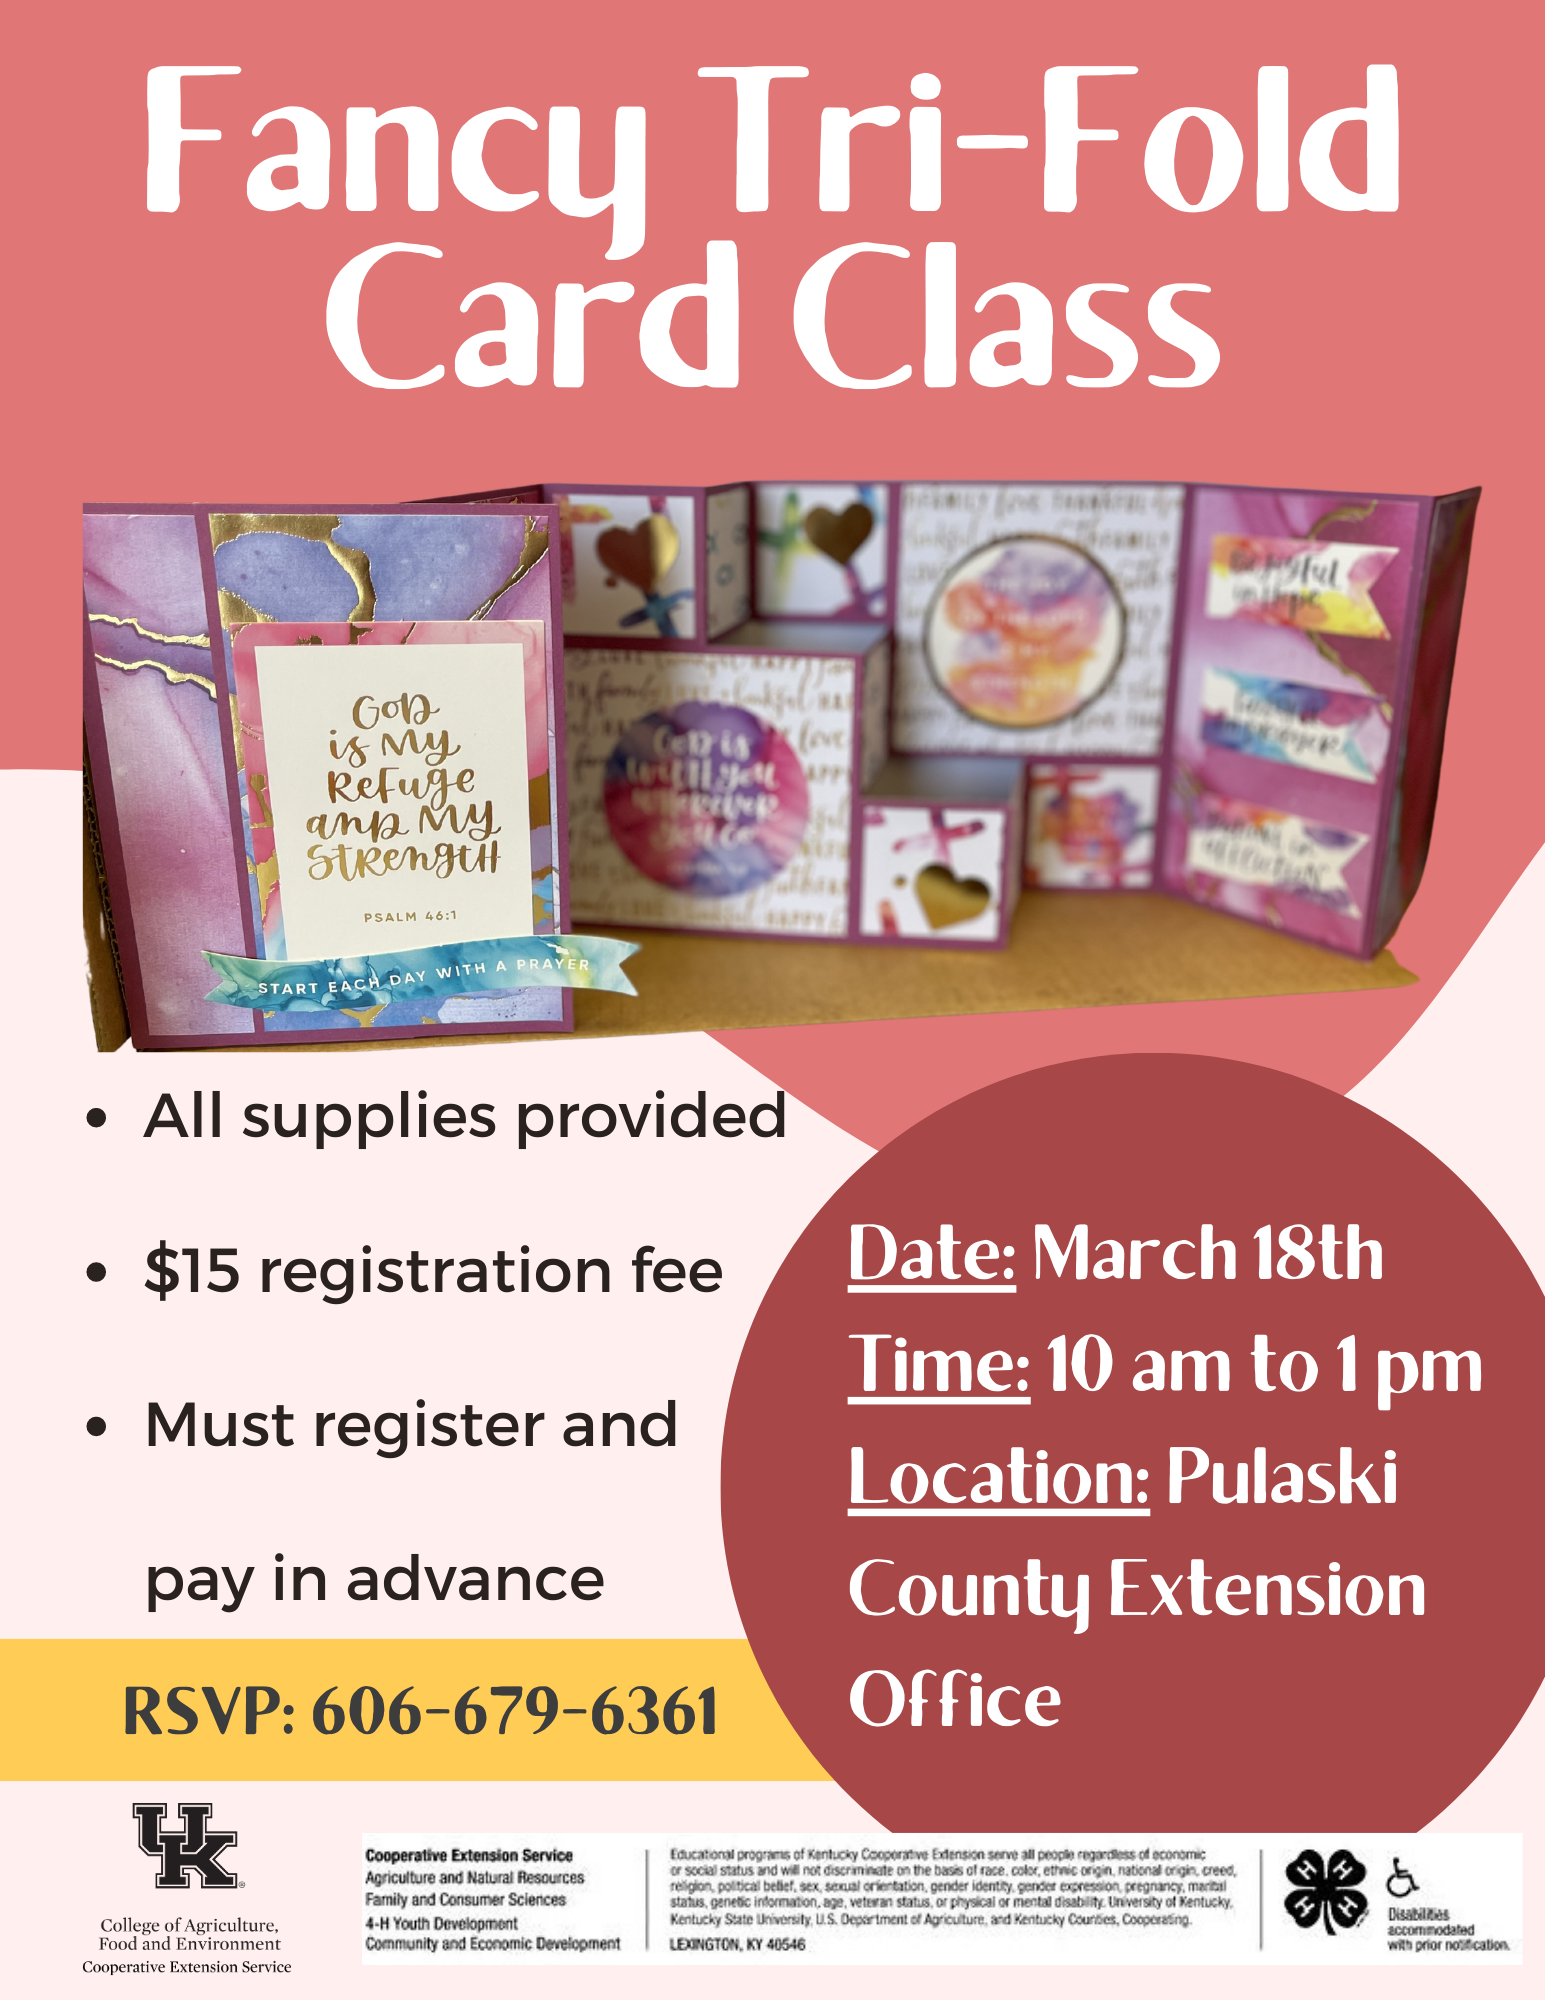 flyer for tri-fold card class gives picture of the card to be made